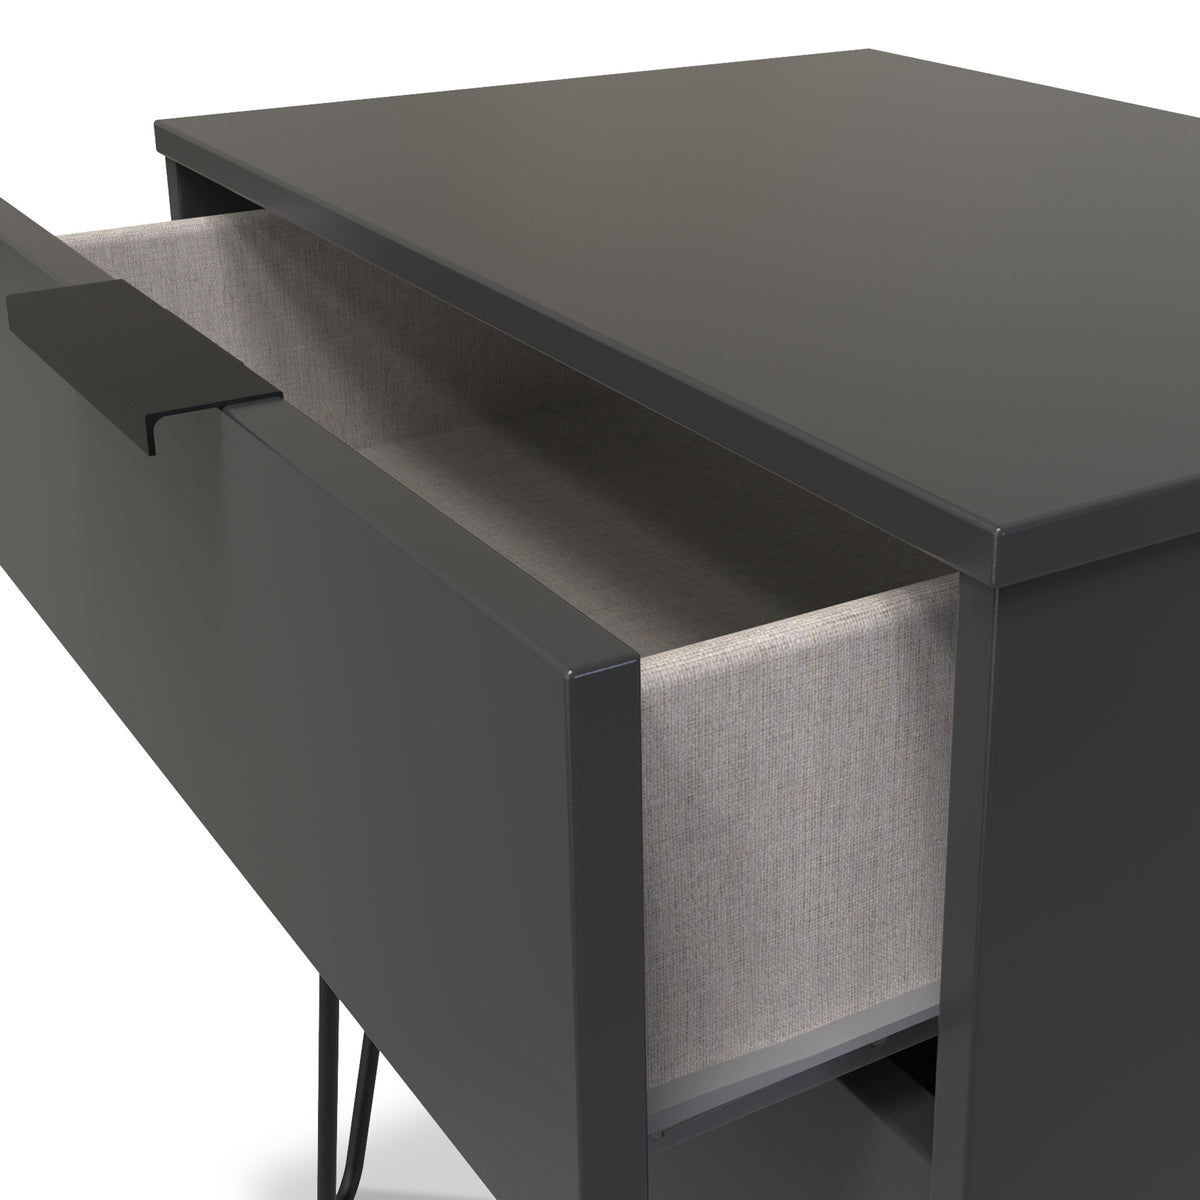 Moreno Graphite Grey 2 Drawer Sofa Side Lamp Table with Hairpin Legs from Roseland Furniture